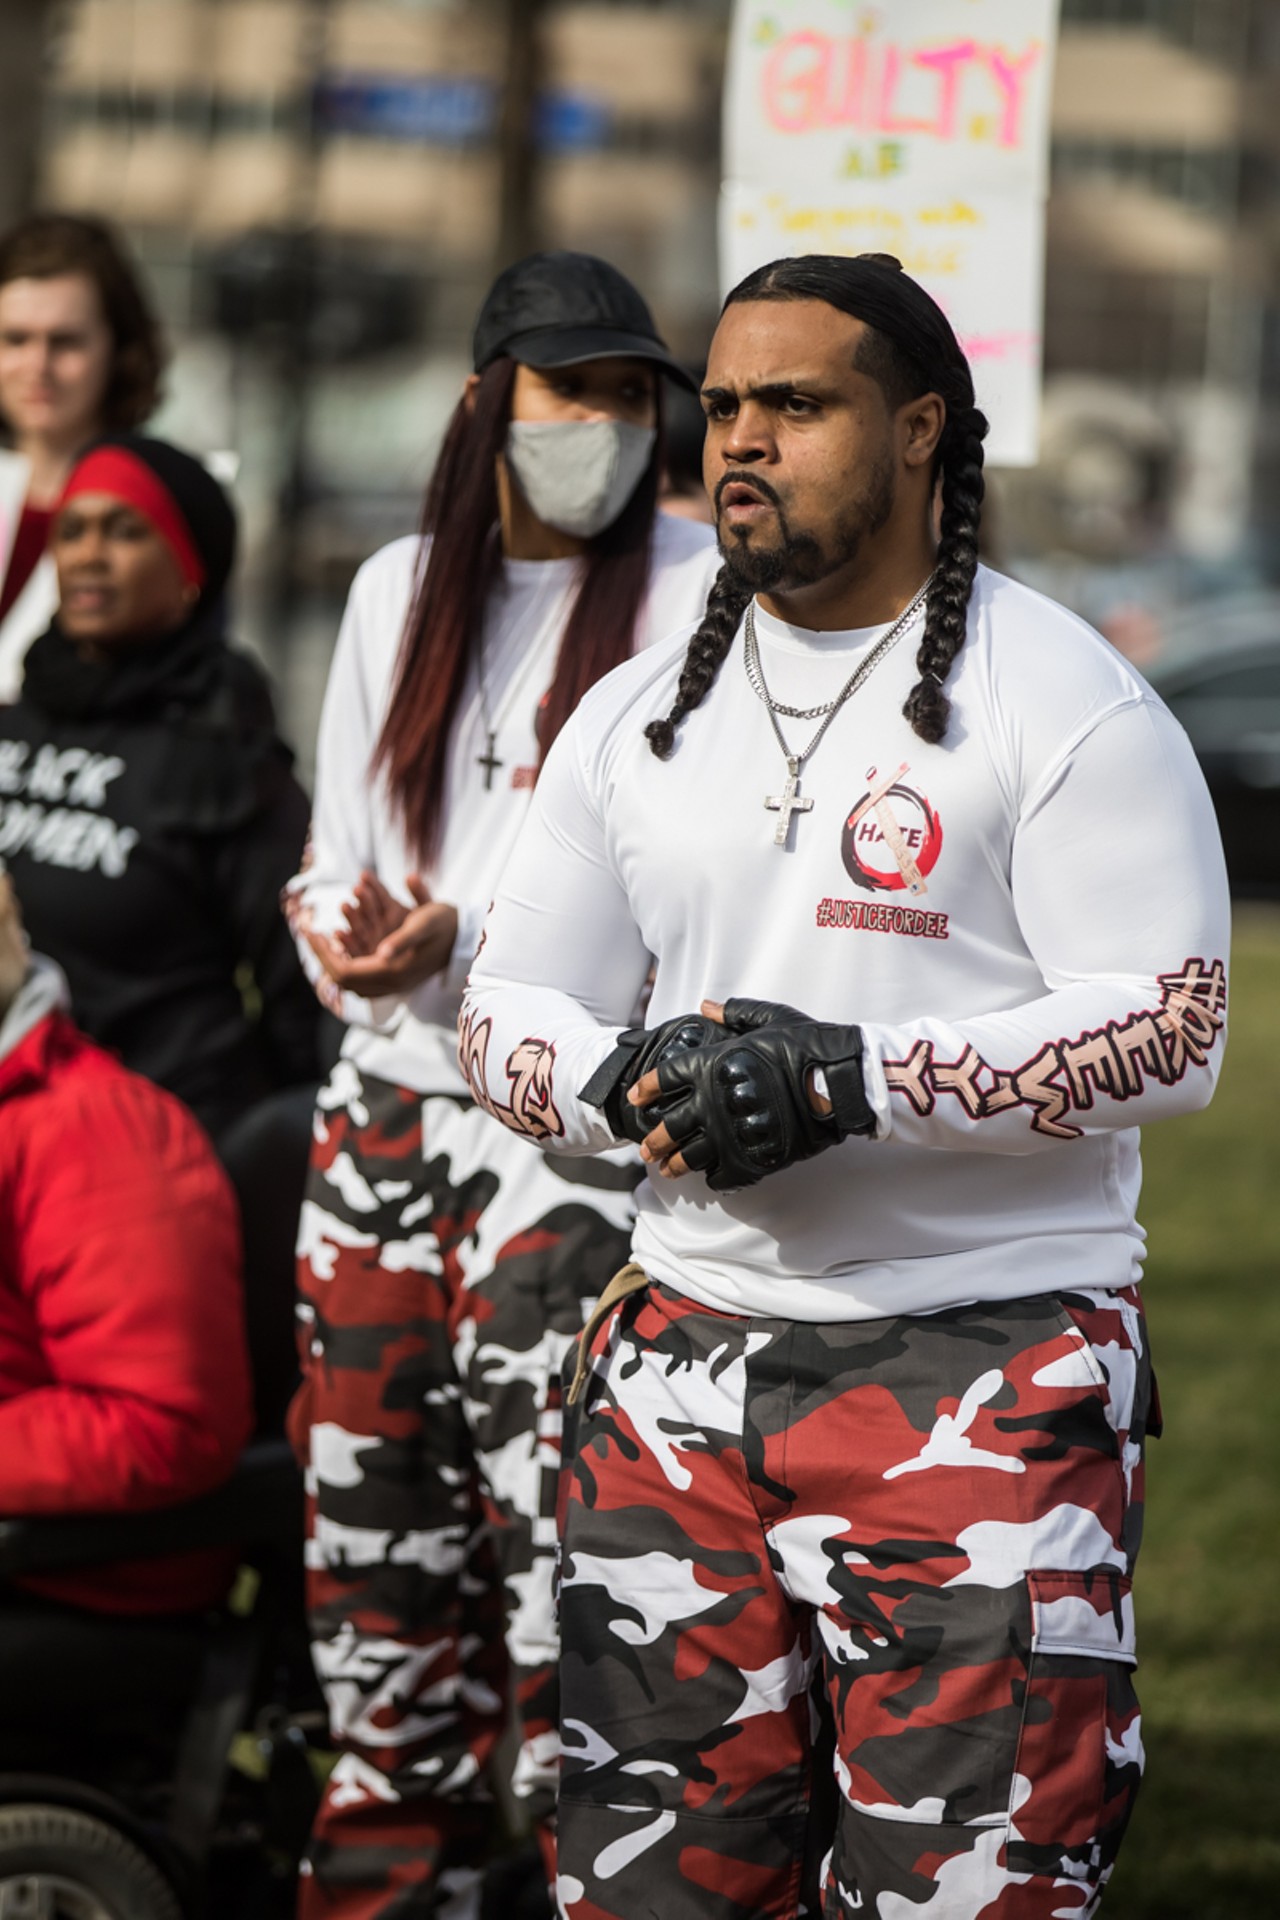 Photos: Breonna Taylor Protesters Return To Injustice Square The Day After Hankison&#146;s Acquittal